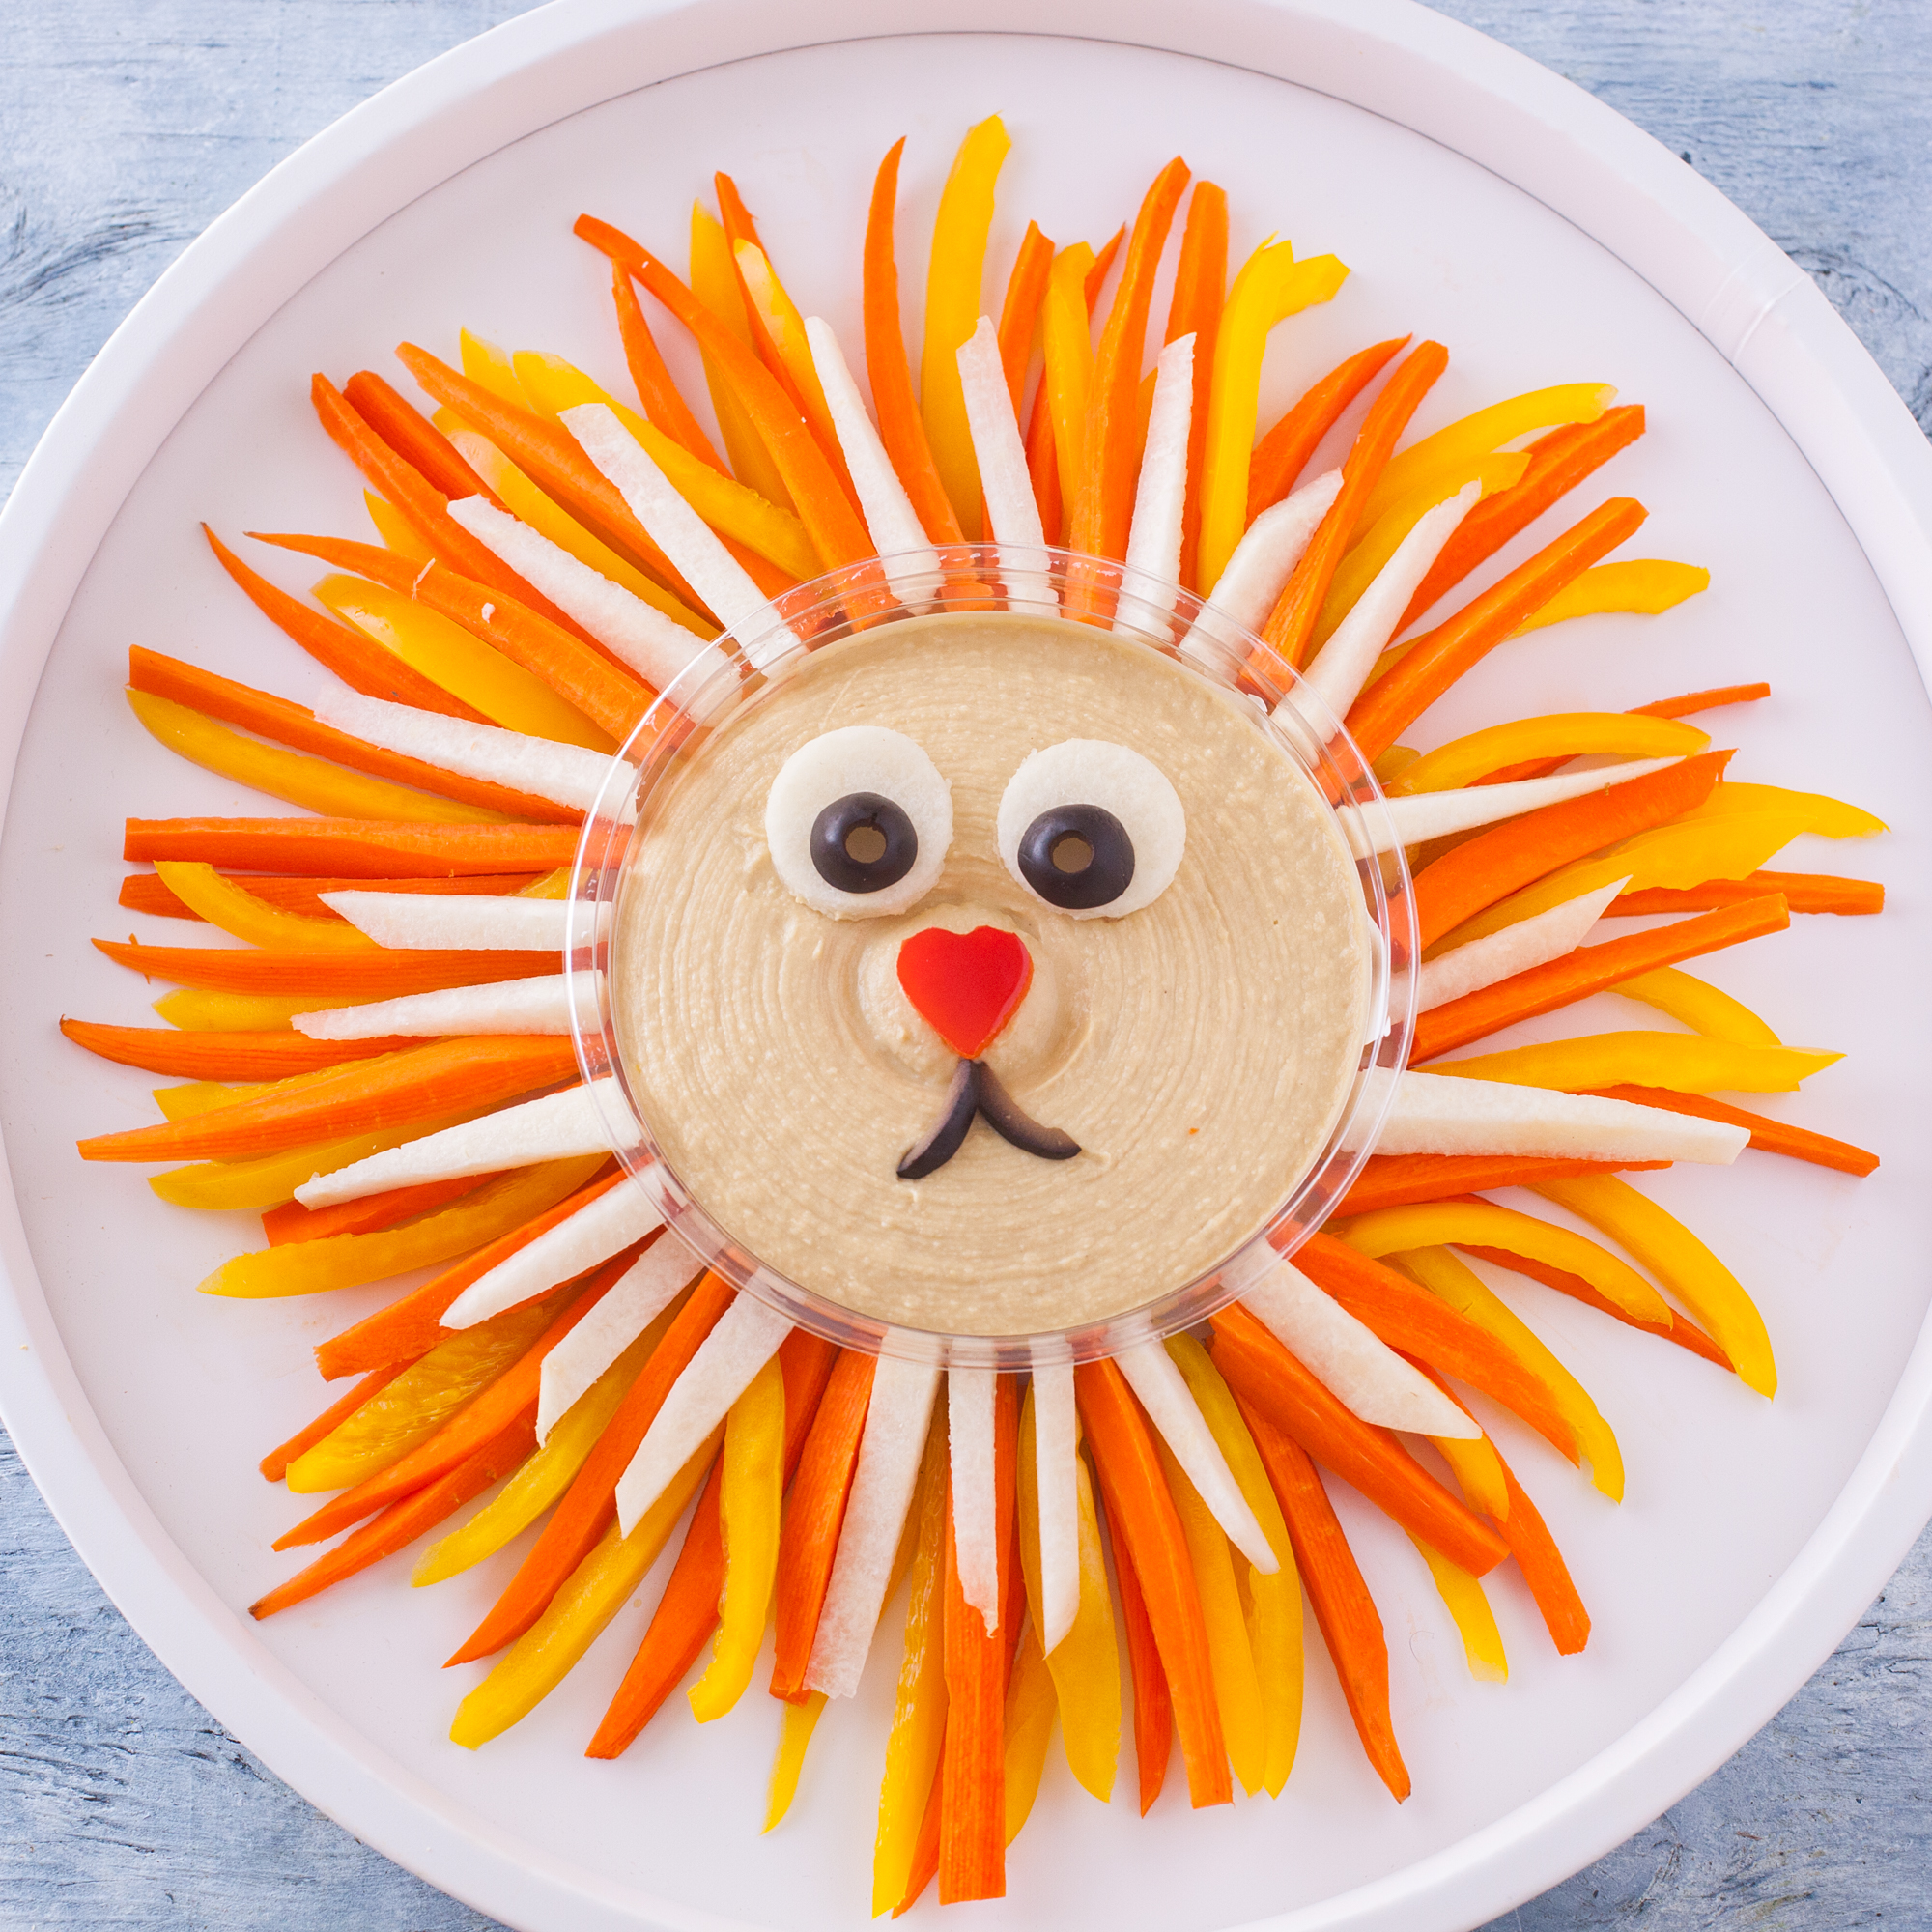 Kids and adults love this cute lion vegetable tray so much, they will stuff themselves on veggies without even realizing it! From EatingRichly.com